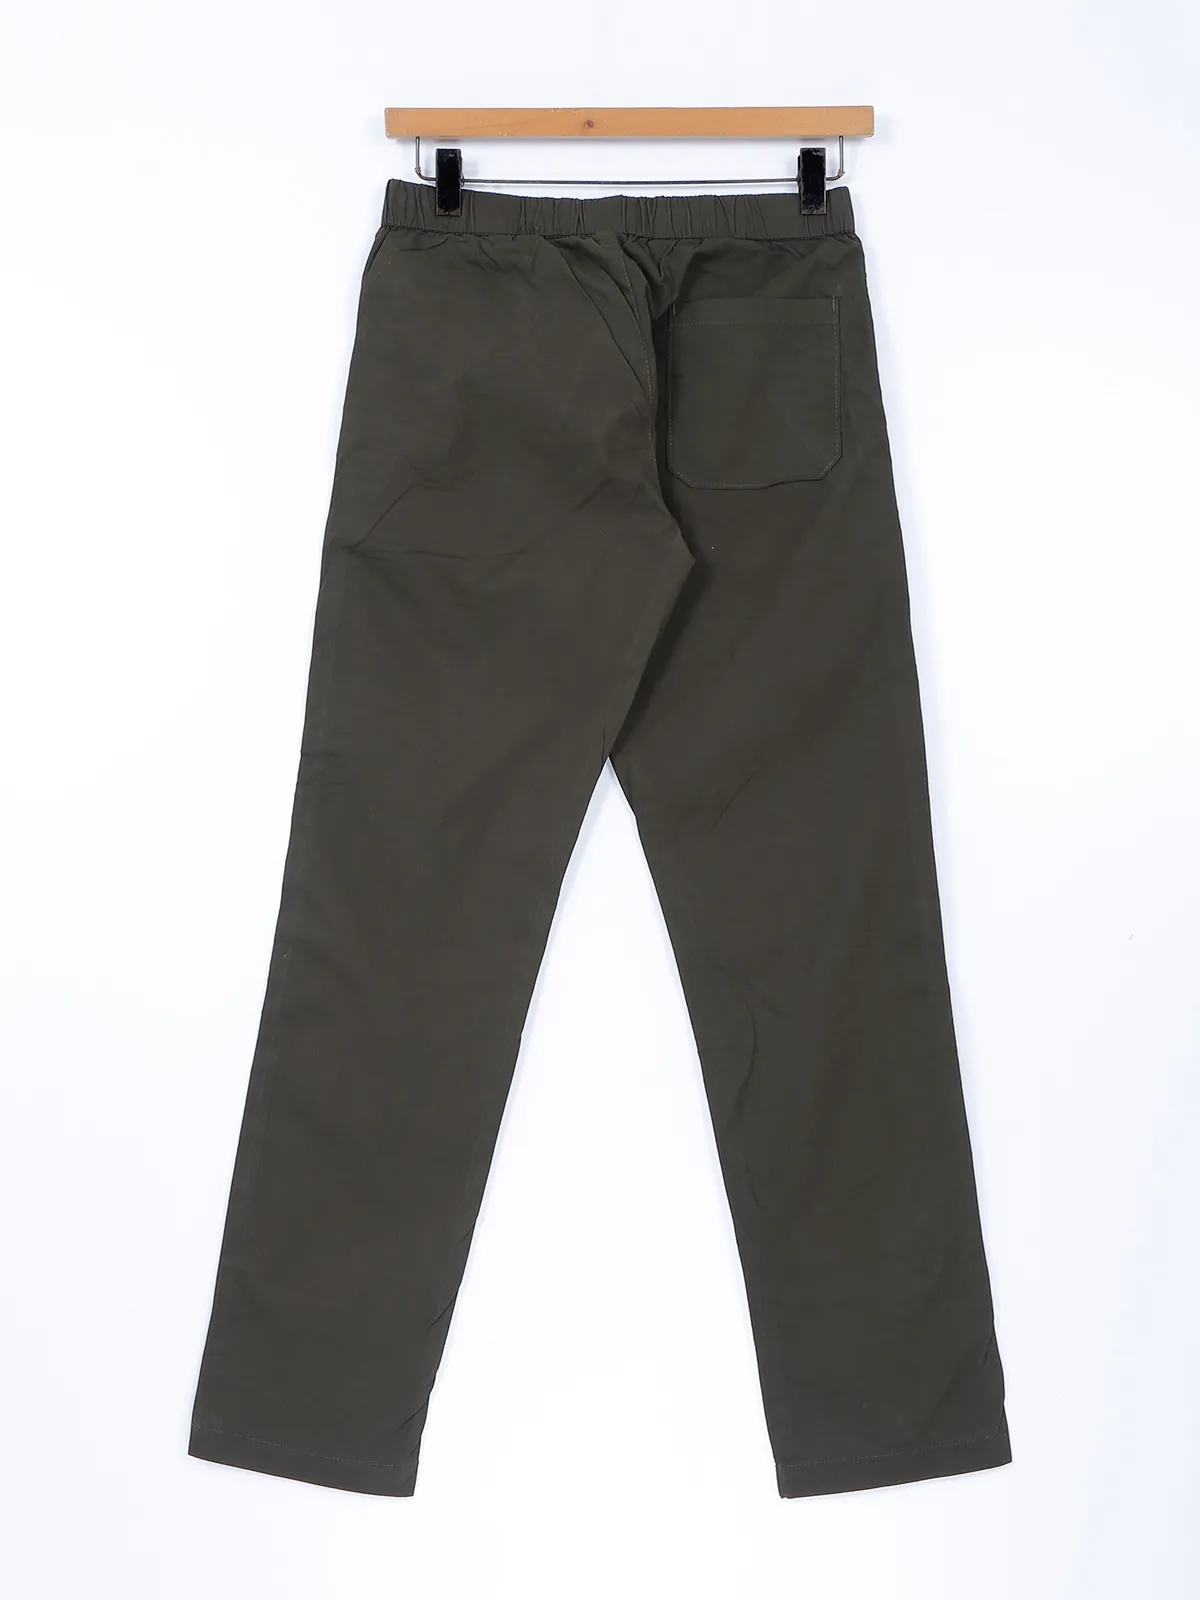 Beevee olive cotton track pant